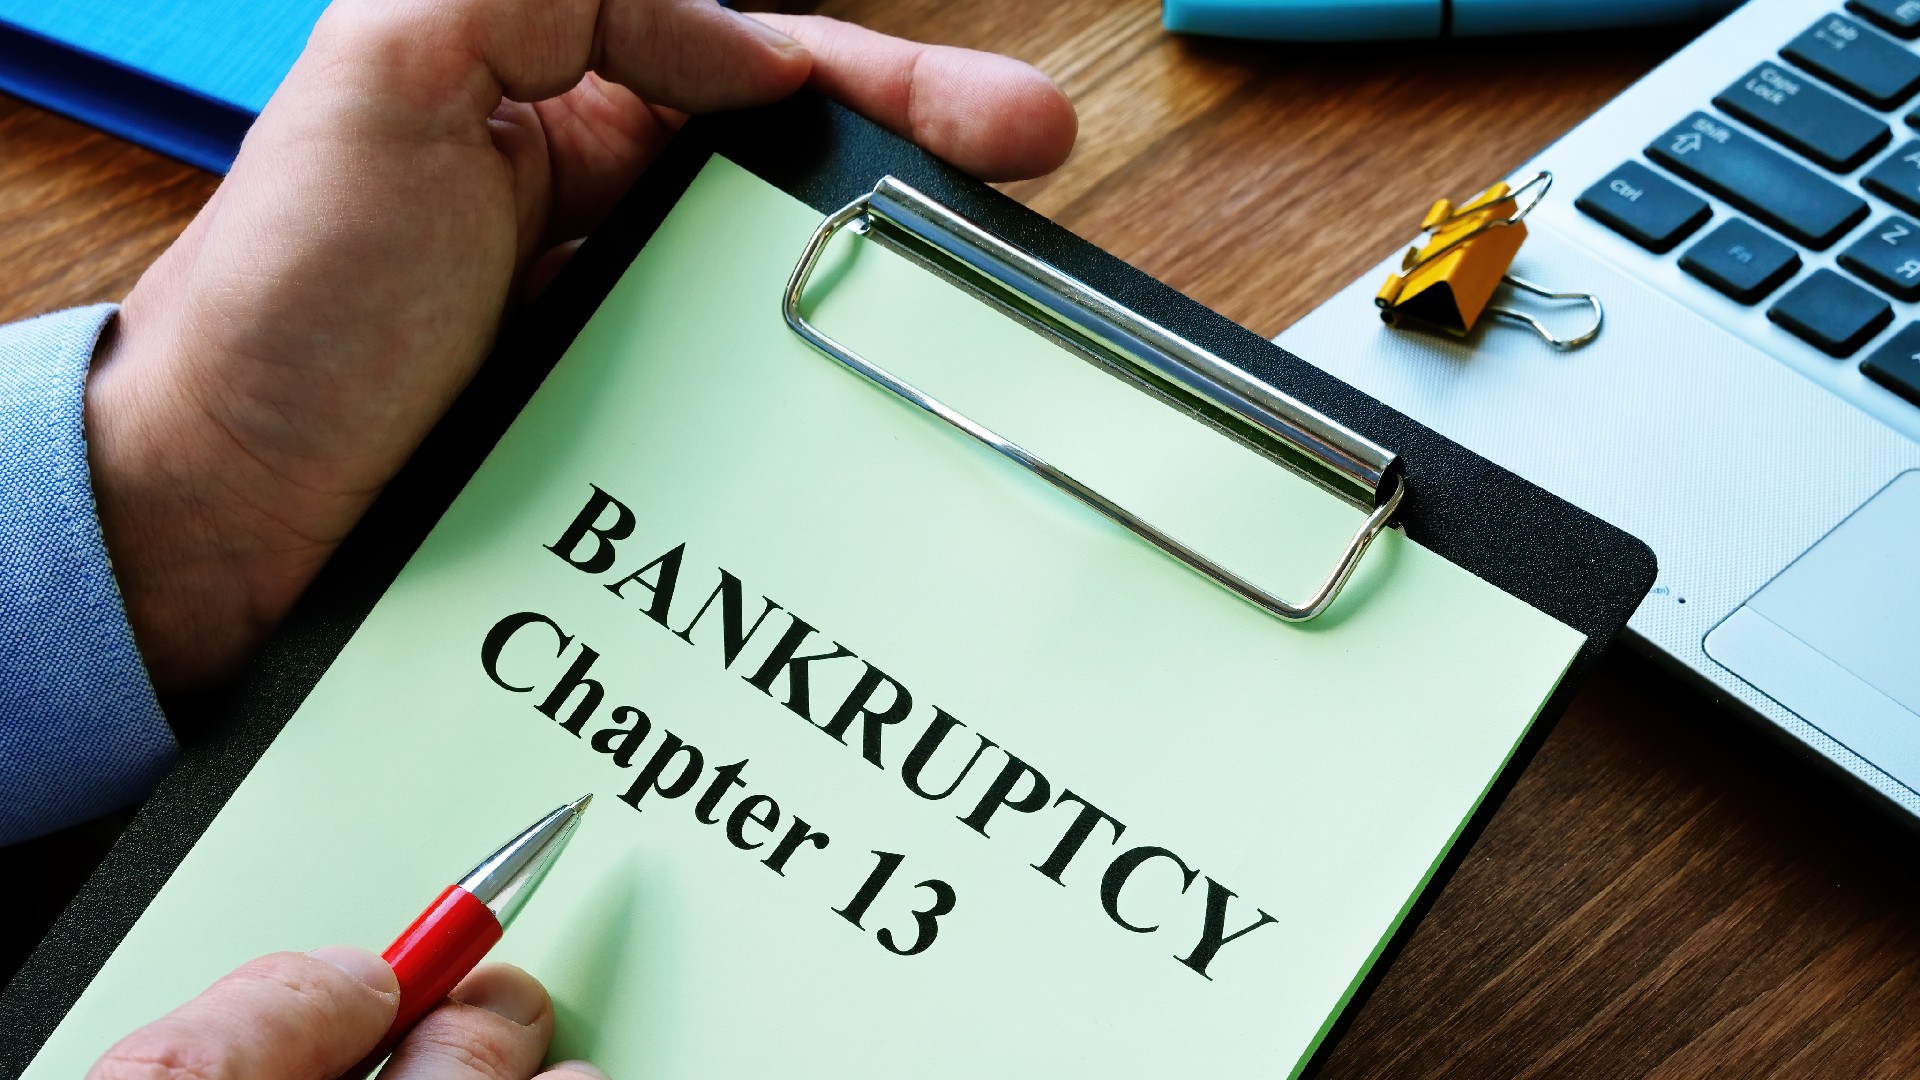 A paper on a clipboard is labeled “Bankruptcy Chapter 13